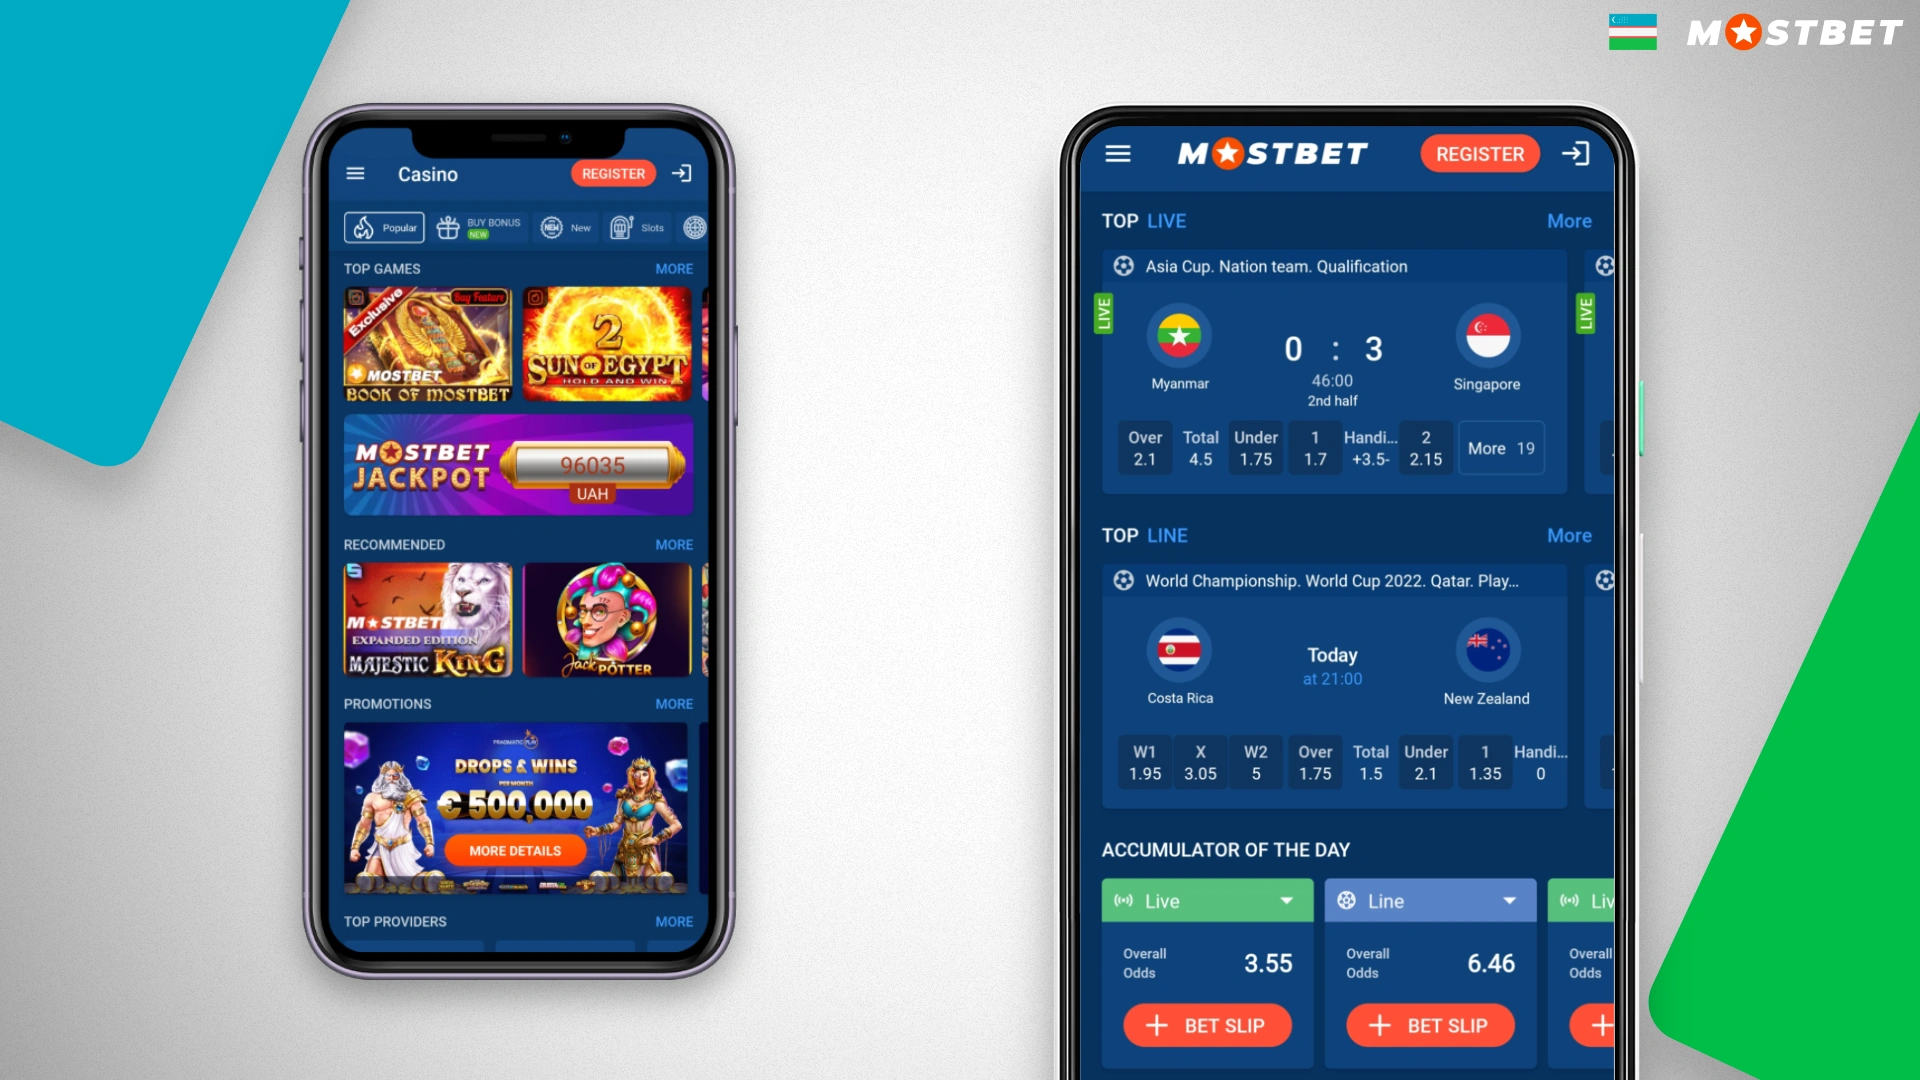 Mostbet mobile app for betting on sports from Uzbekistan